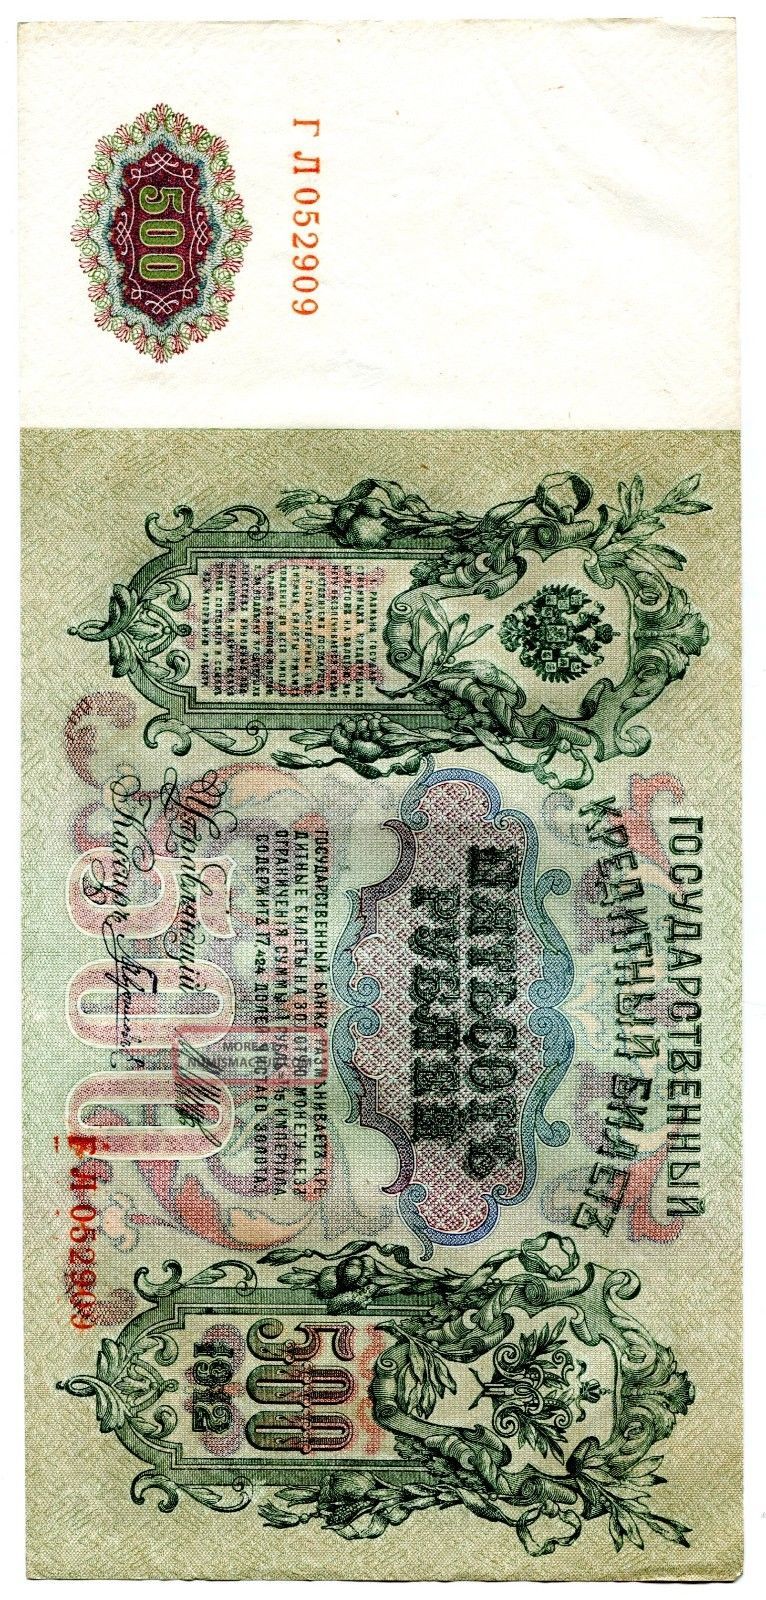 RUSSIA BANKNOTE 500 RUBLES 1912 LARGE SIZE